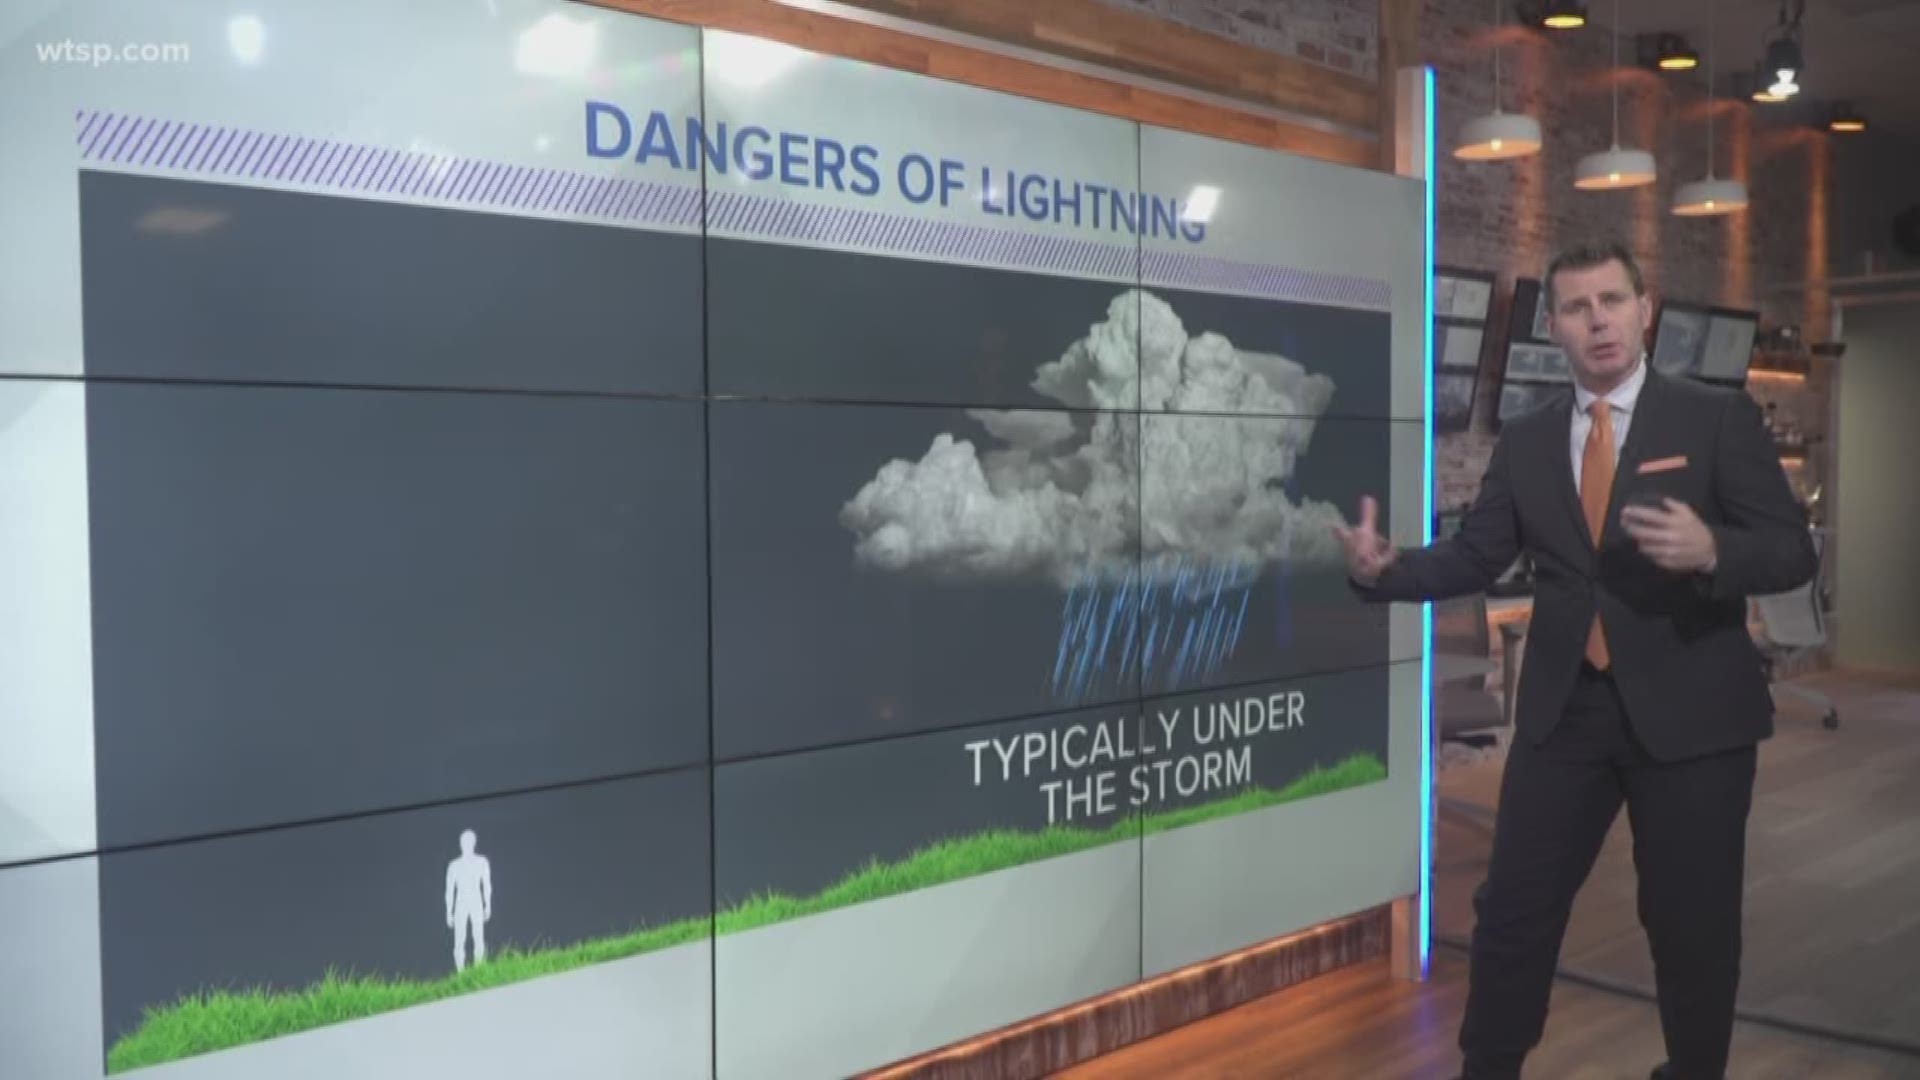 There's no other place in the United States that receives more lightning strikes than the state of Florida, and the Tampa Bay region is ground zero.

There were more lightning fatalities in Florida in 2018 than anywhere else in the country: Seven deaths were reported, according to the National Weather Service. One person was struck and killed while riding their motorcycle in Ormond Beach, Florida, this year.

And there's a renewed sense of lightning safety after eight people were hurt, one critically, when a bolt hit Clearwater Beach.

There is no simpler advice regarding lightning awareness than this: "When thunder roars, go indoors!" Lightning -- which is hotter than the surface of the sun! -- can strike you even when it seems perfectly sunny outside because the bolt can travel some 20 miles away from the parent thunderstorm.

According to the weather service, there is no way you can be completely safe from lightning if you are outside during a storm. The only and best course of action is to get indoors or into a car. If you're out boating or out on the beach and thunderstorms are in the forecast, the water is no place to be that day.

If you're stuck outside, however, get low to the ground.